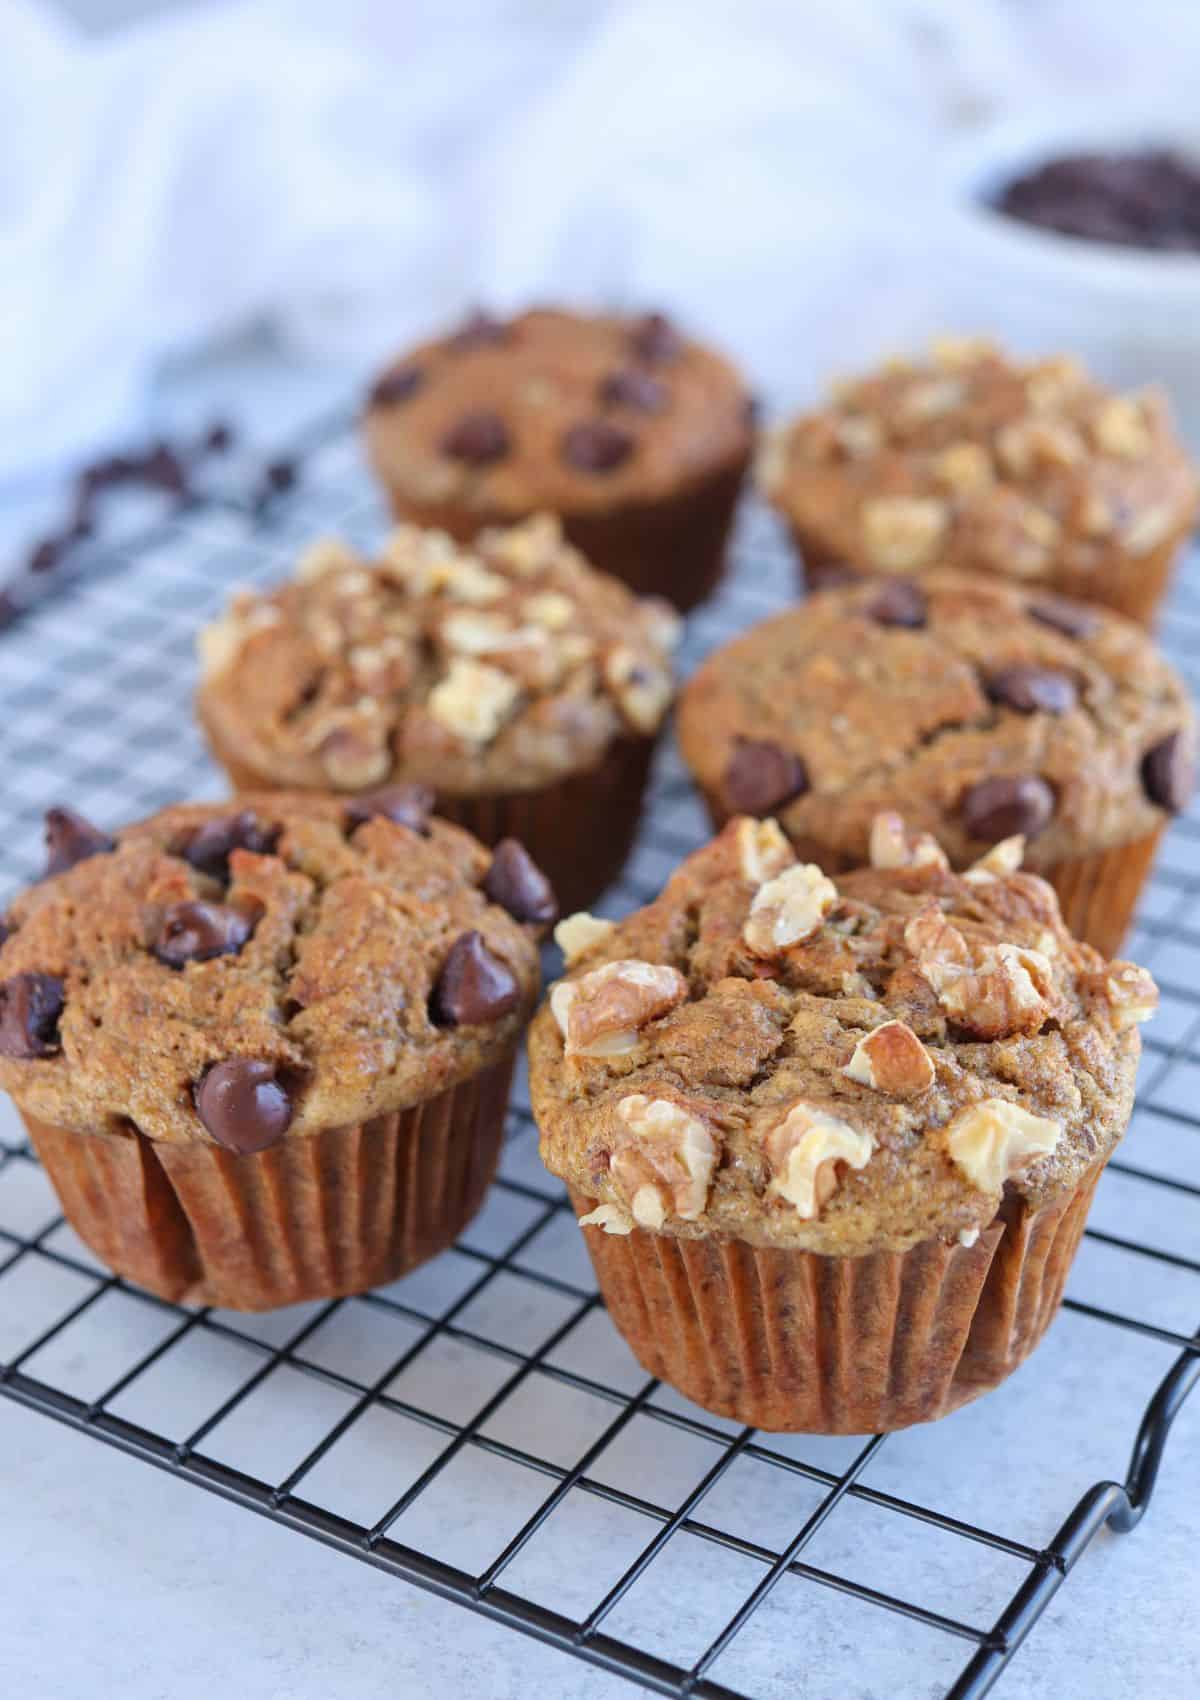 banana muffins with walnuts and chocolate chips on a black wire rack.